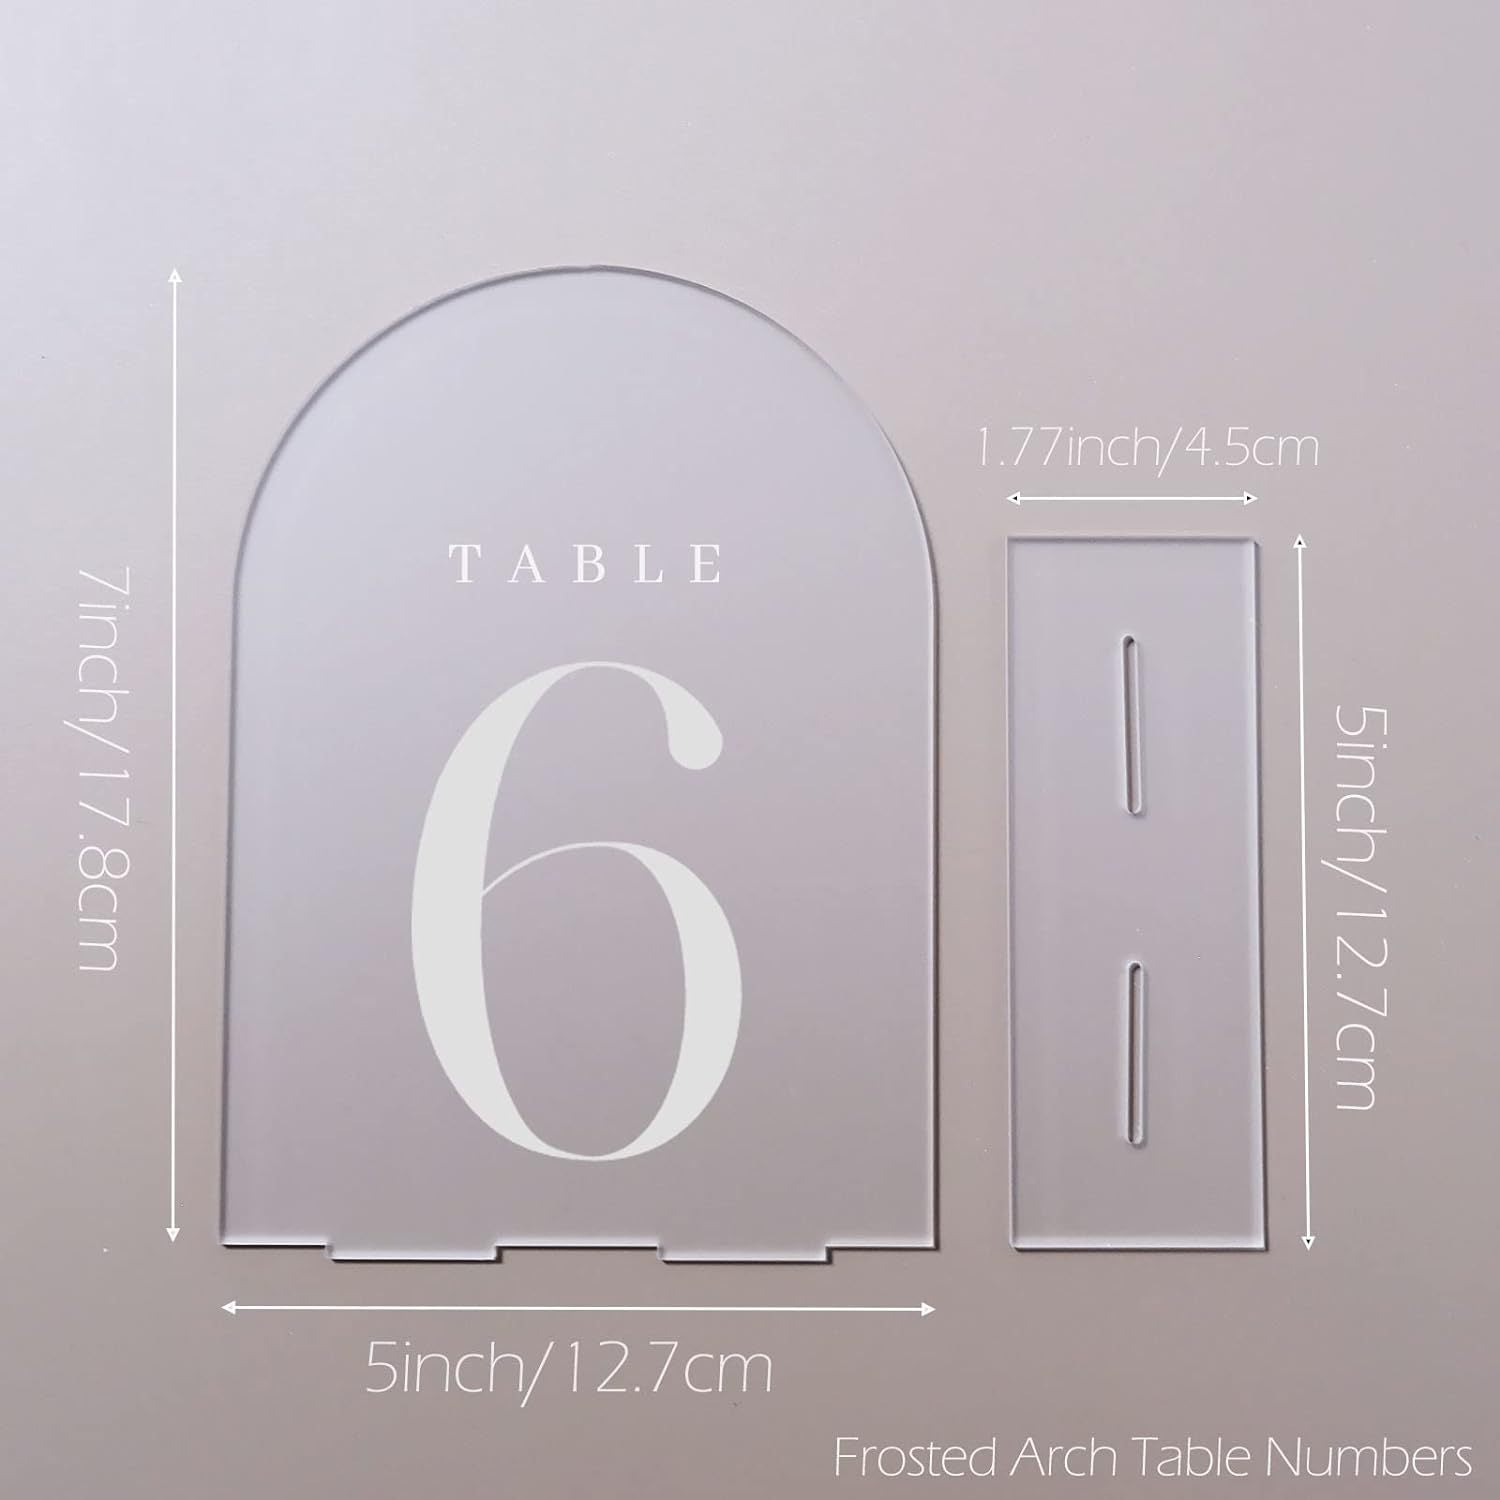 Frosted Arch Acrylic Table Numbers 1-15 for Wedding Reception,5x7 INCH